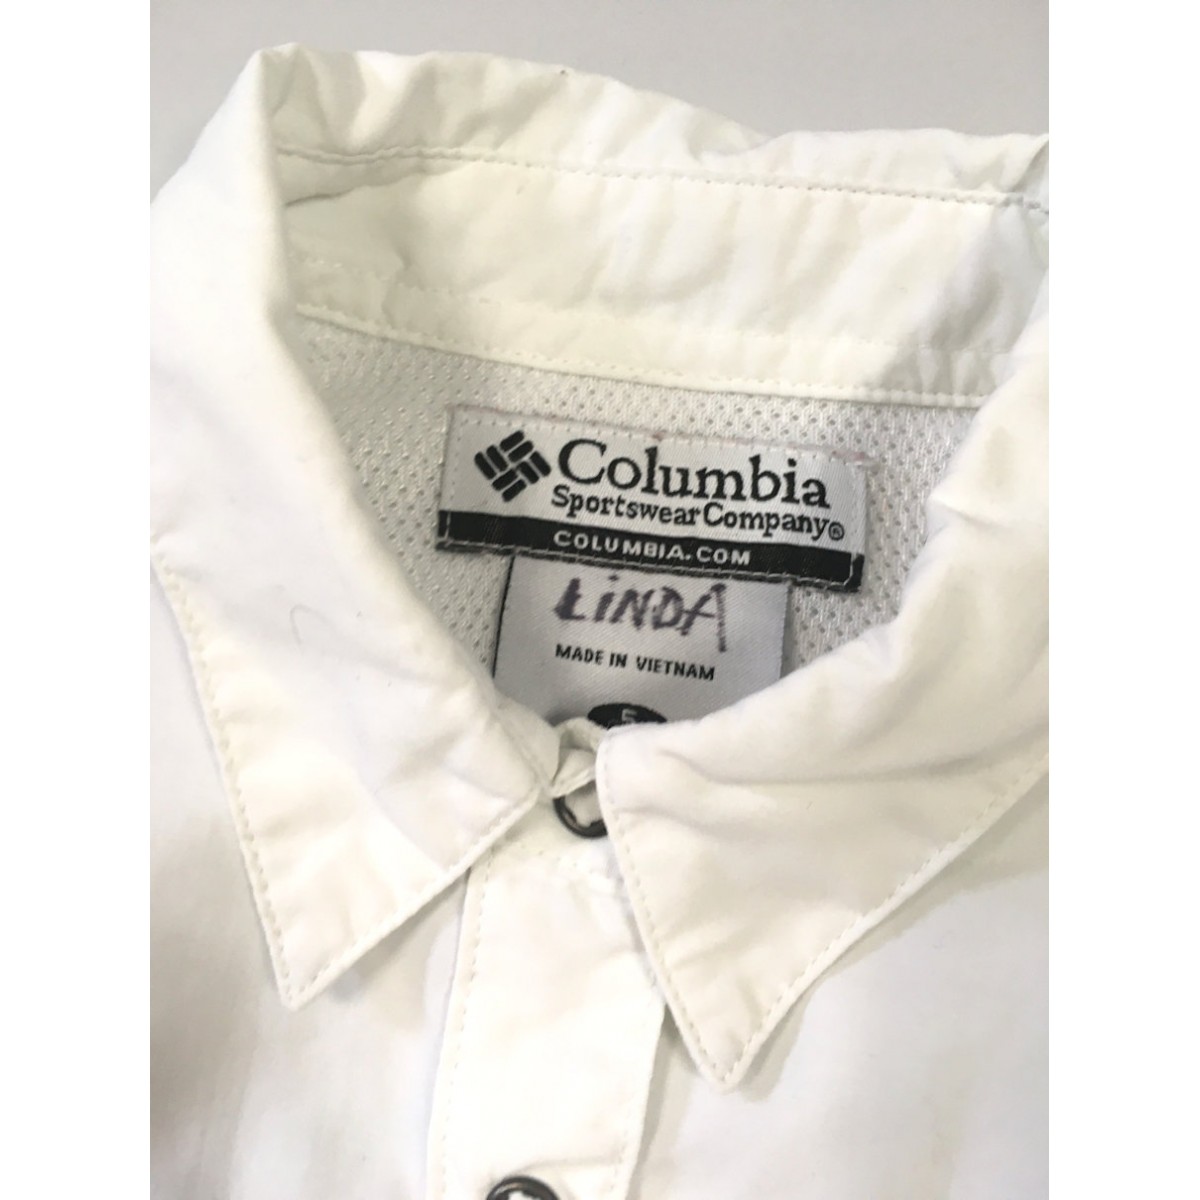 Chemise colombia / 5 ans